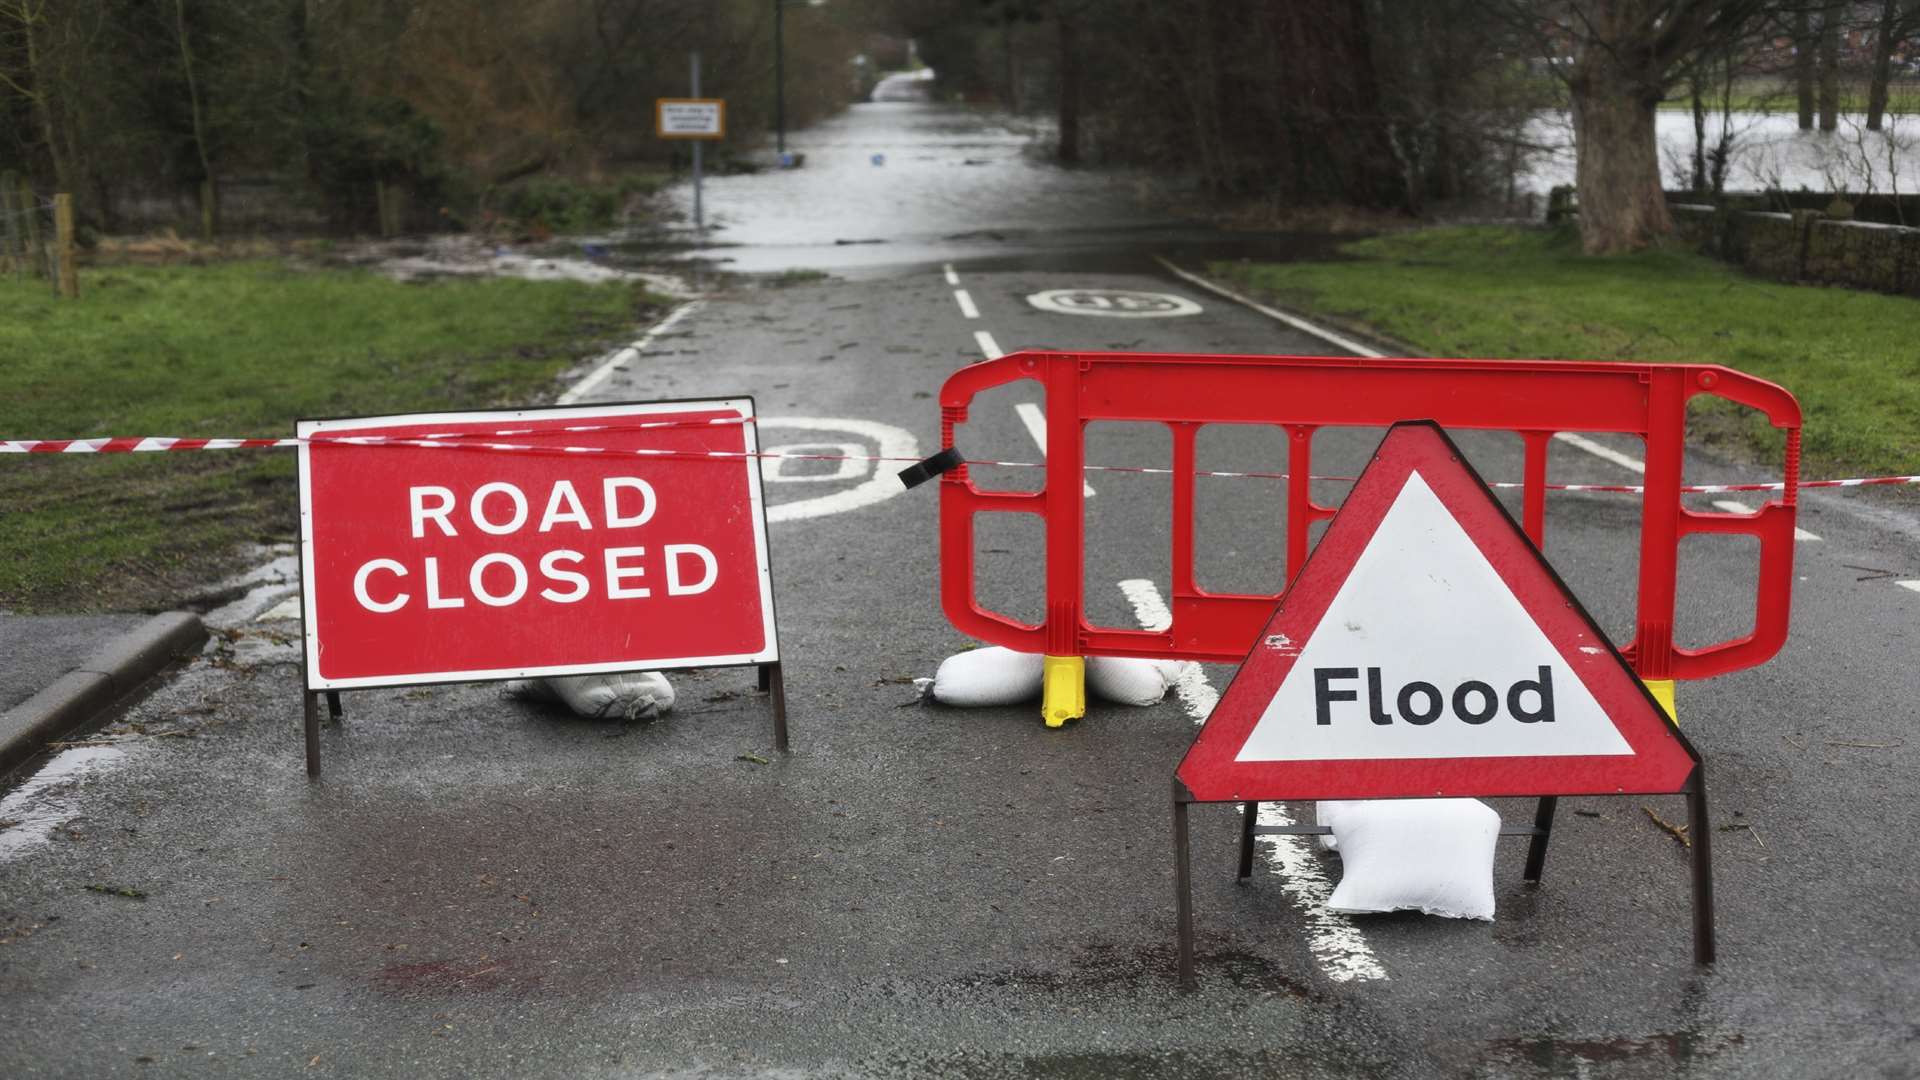 Environment agency experts will be demonstrating how they plan to reduce flood risk in Tonbridge